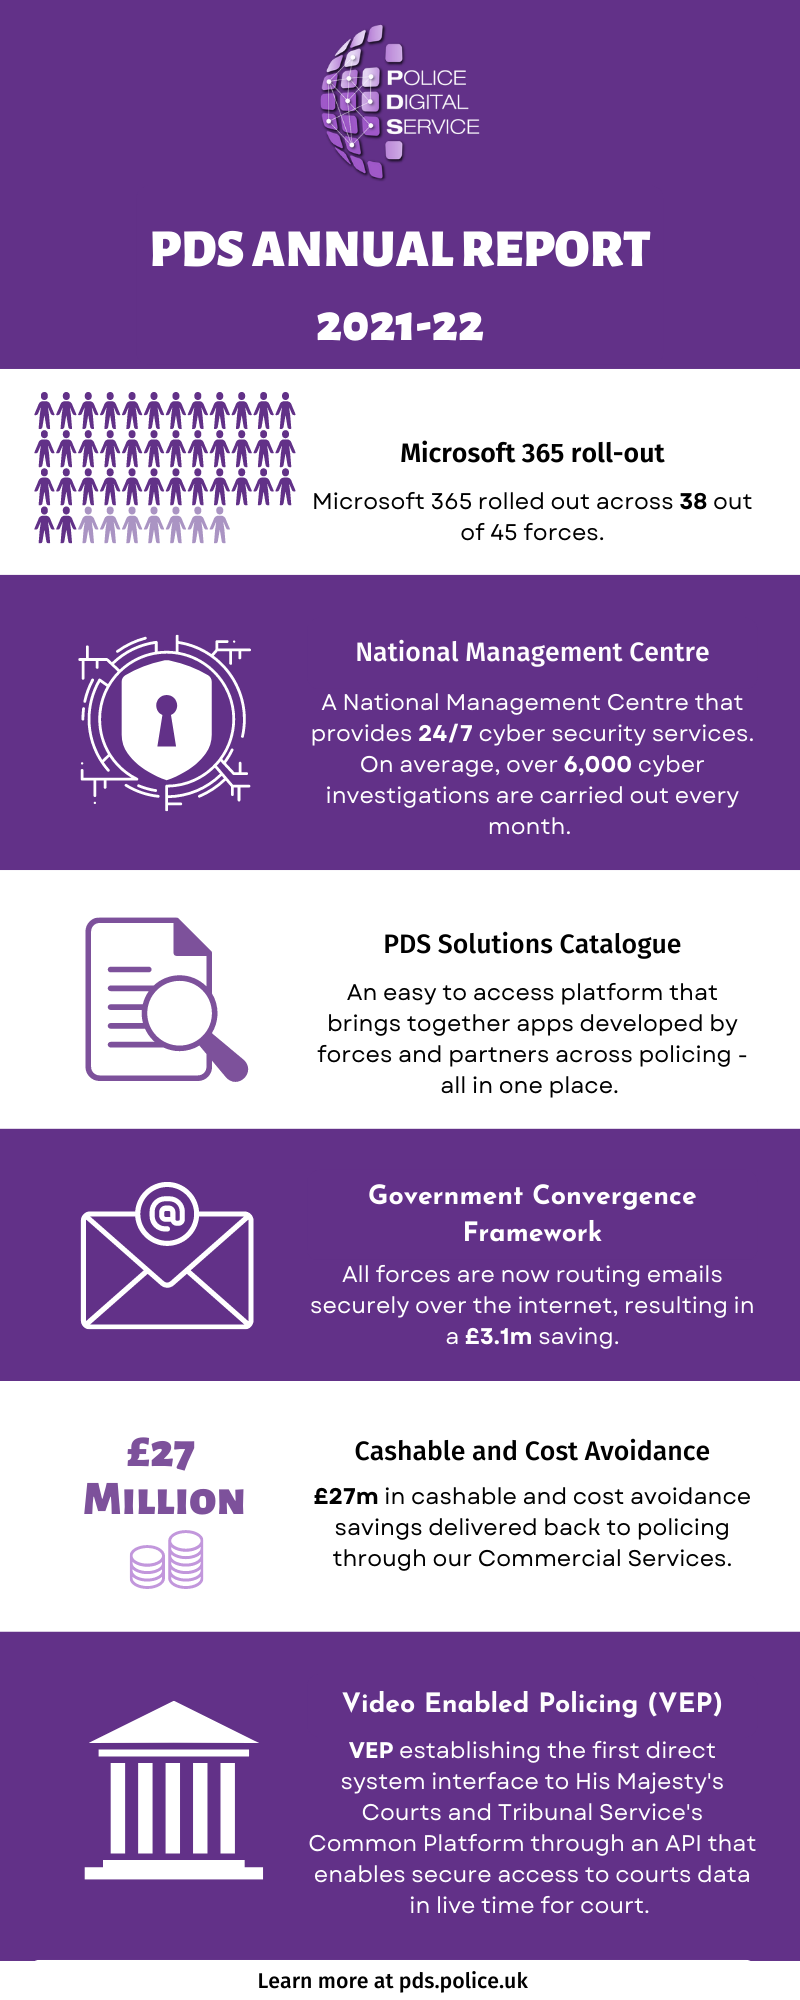 PDS Annual Report 2021-22 Infographic